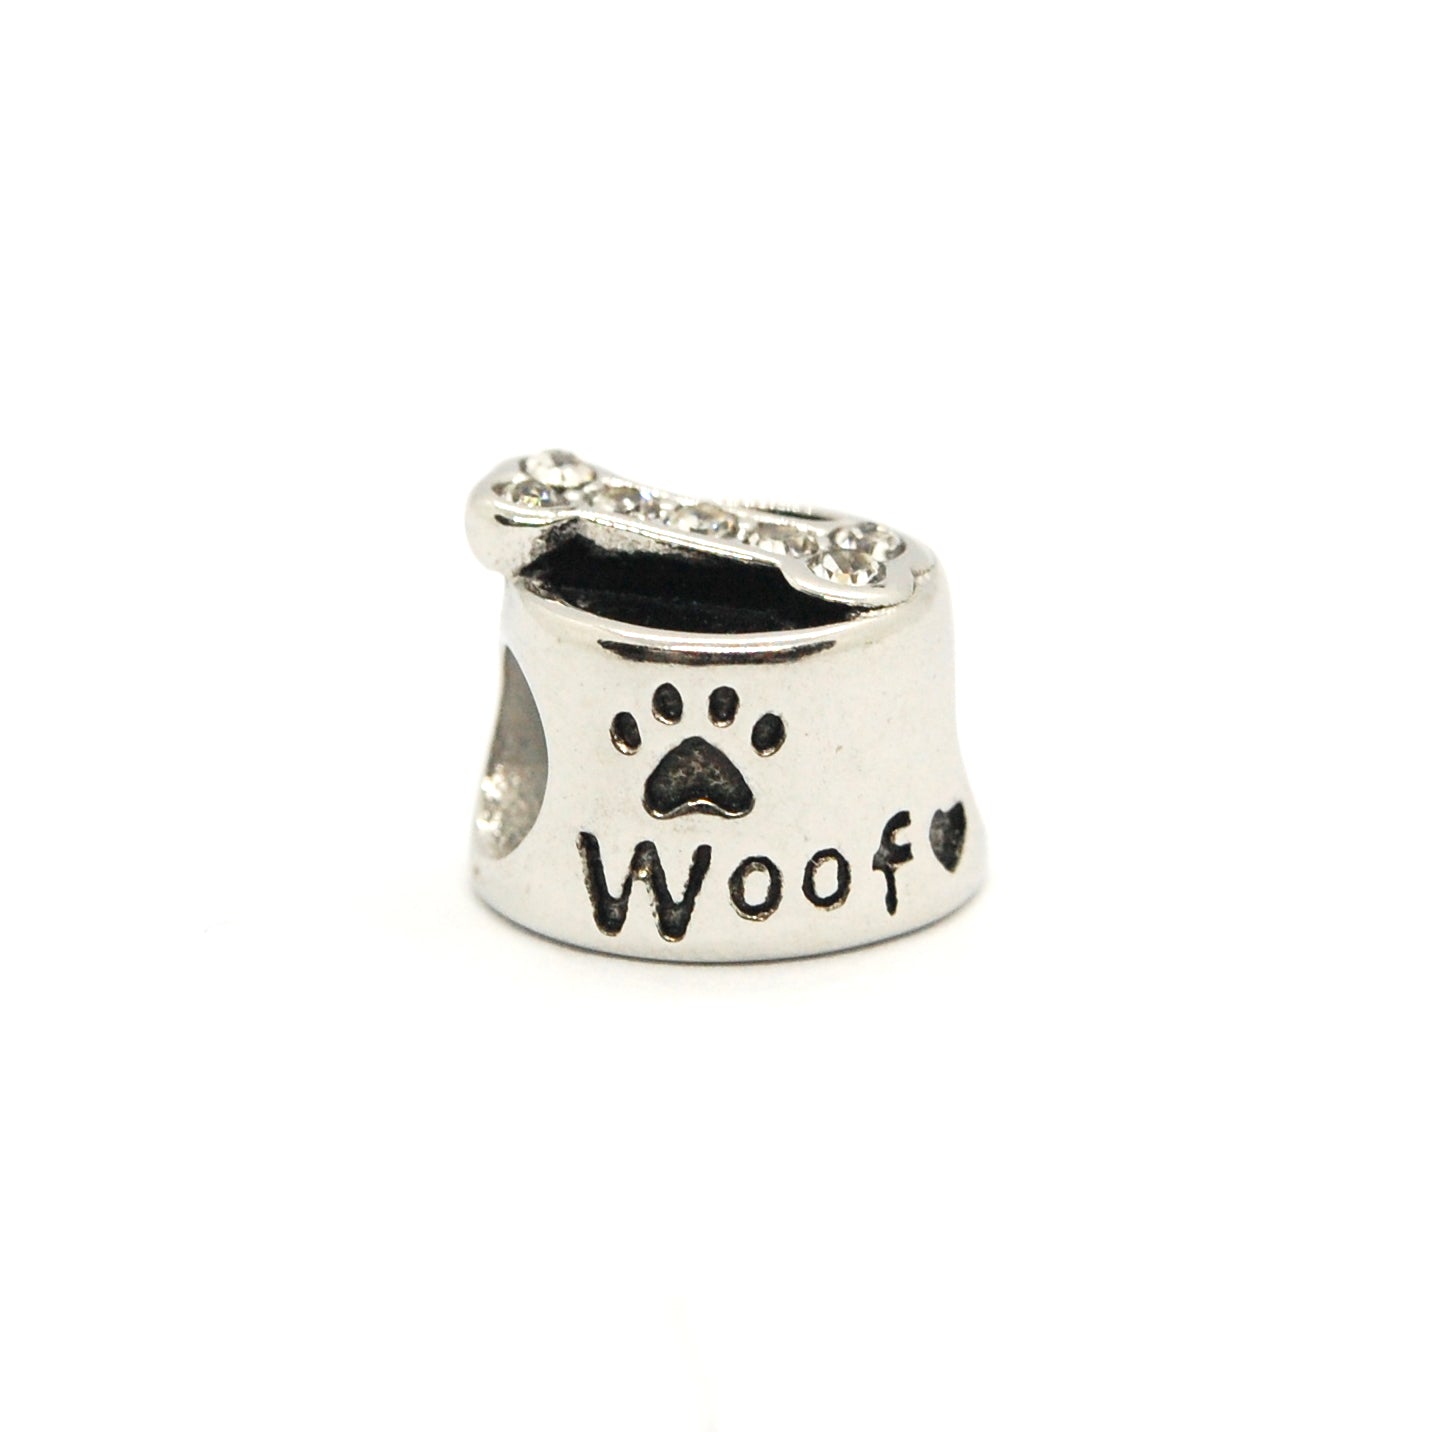 ESCM 6652: "Woof" Love Dogs Charm w/ Cubic zirconia Accents